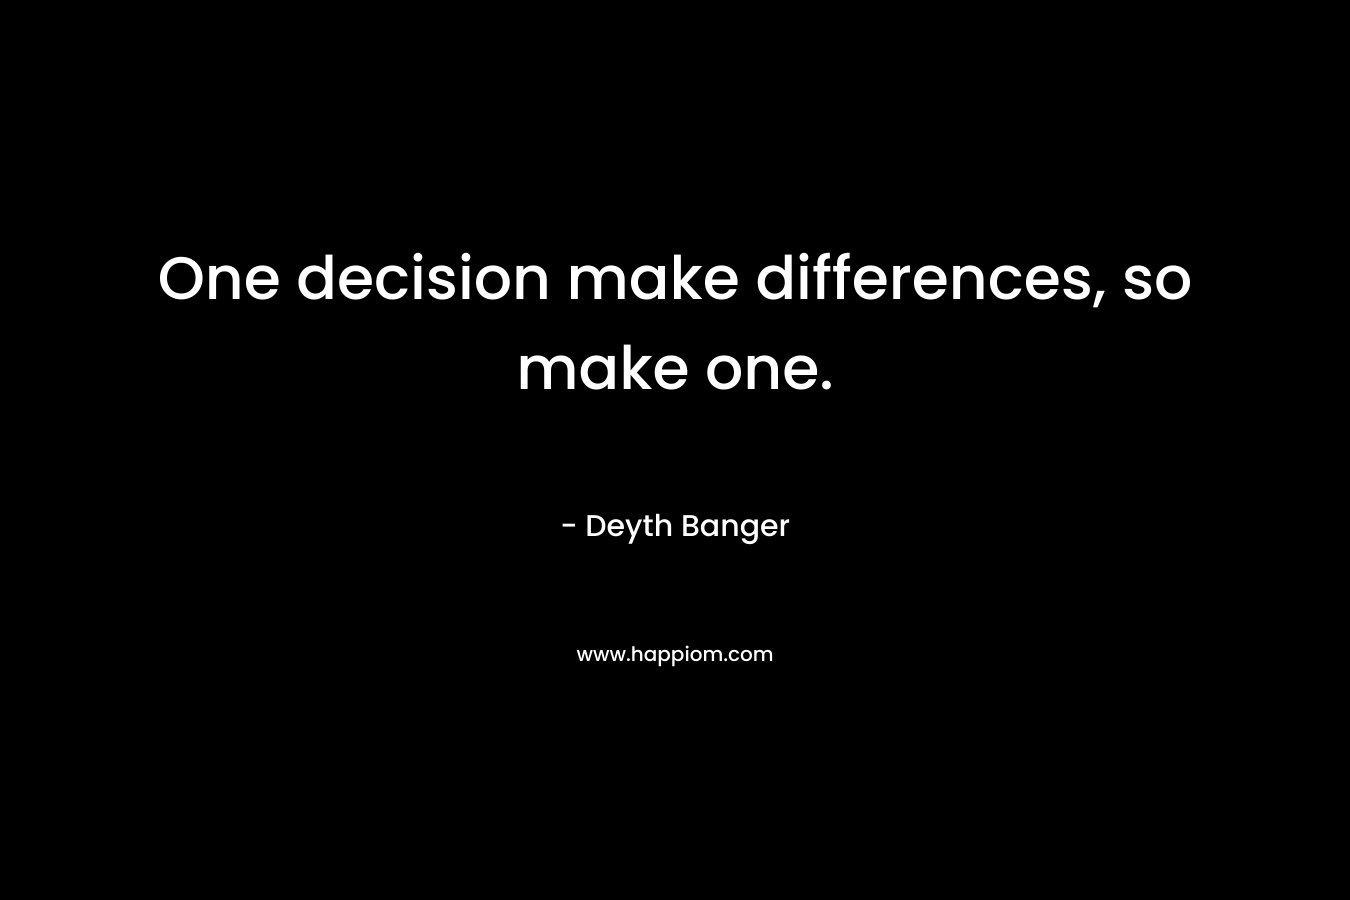 One decision make differences, so make one.